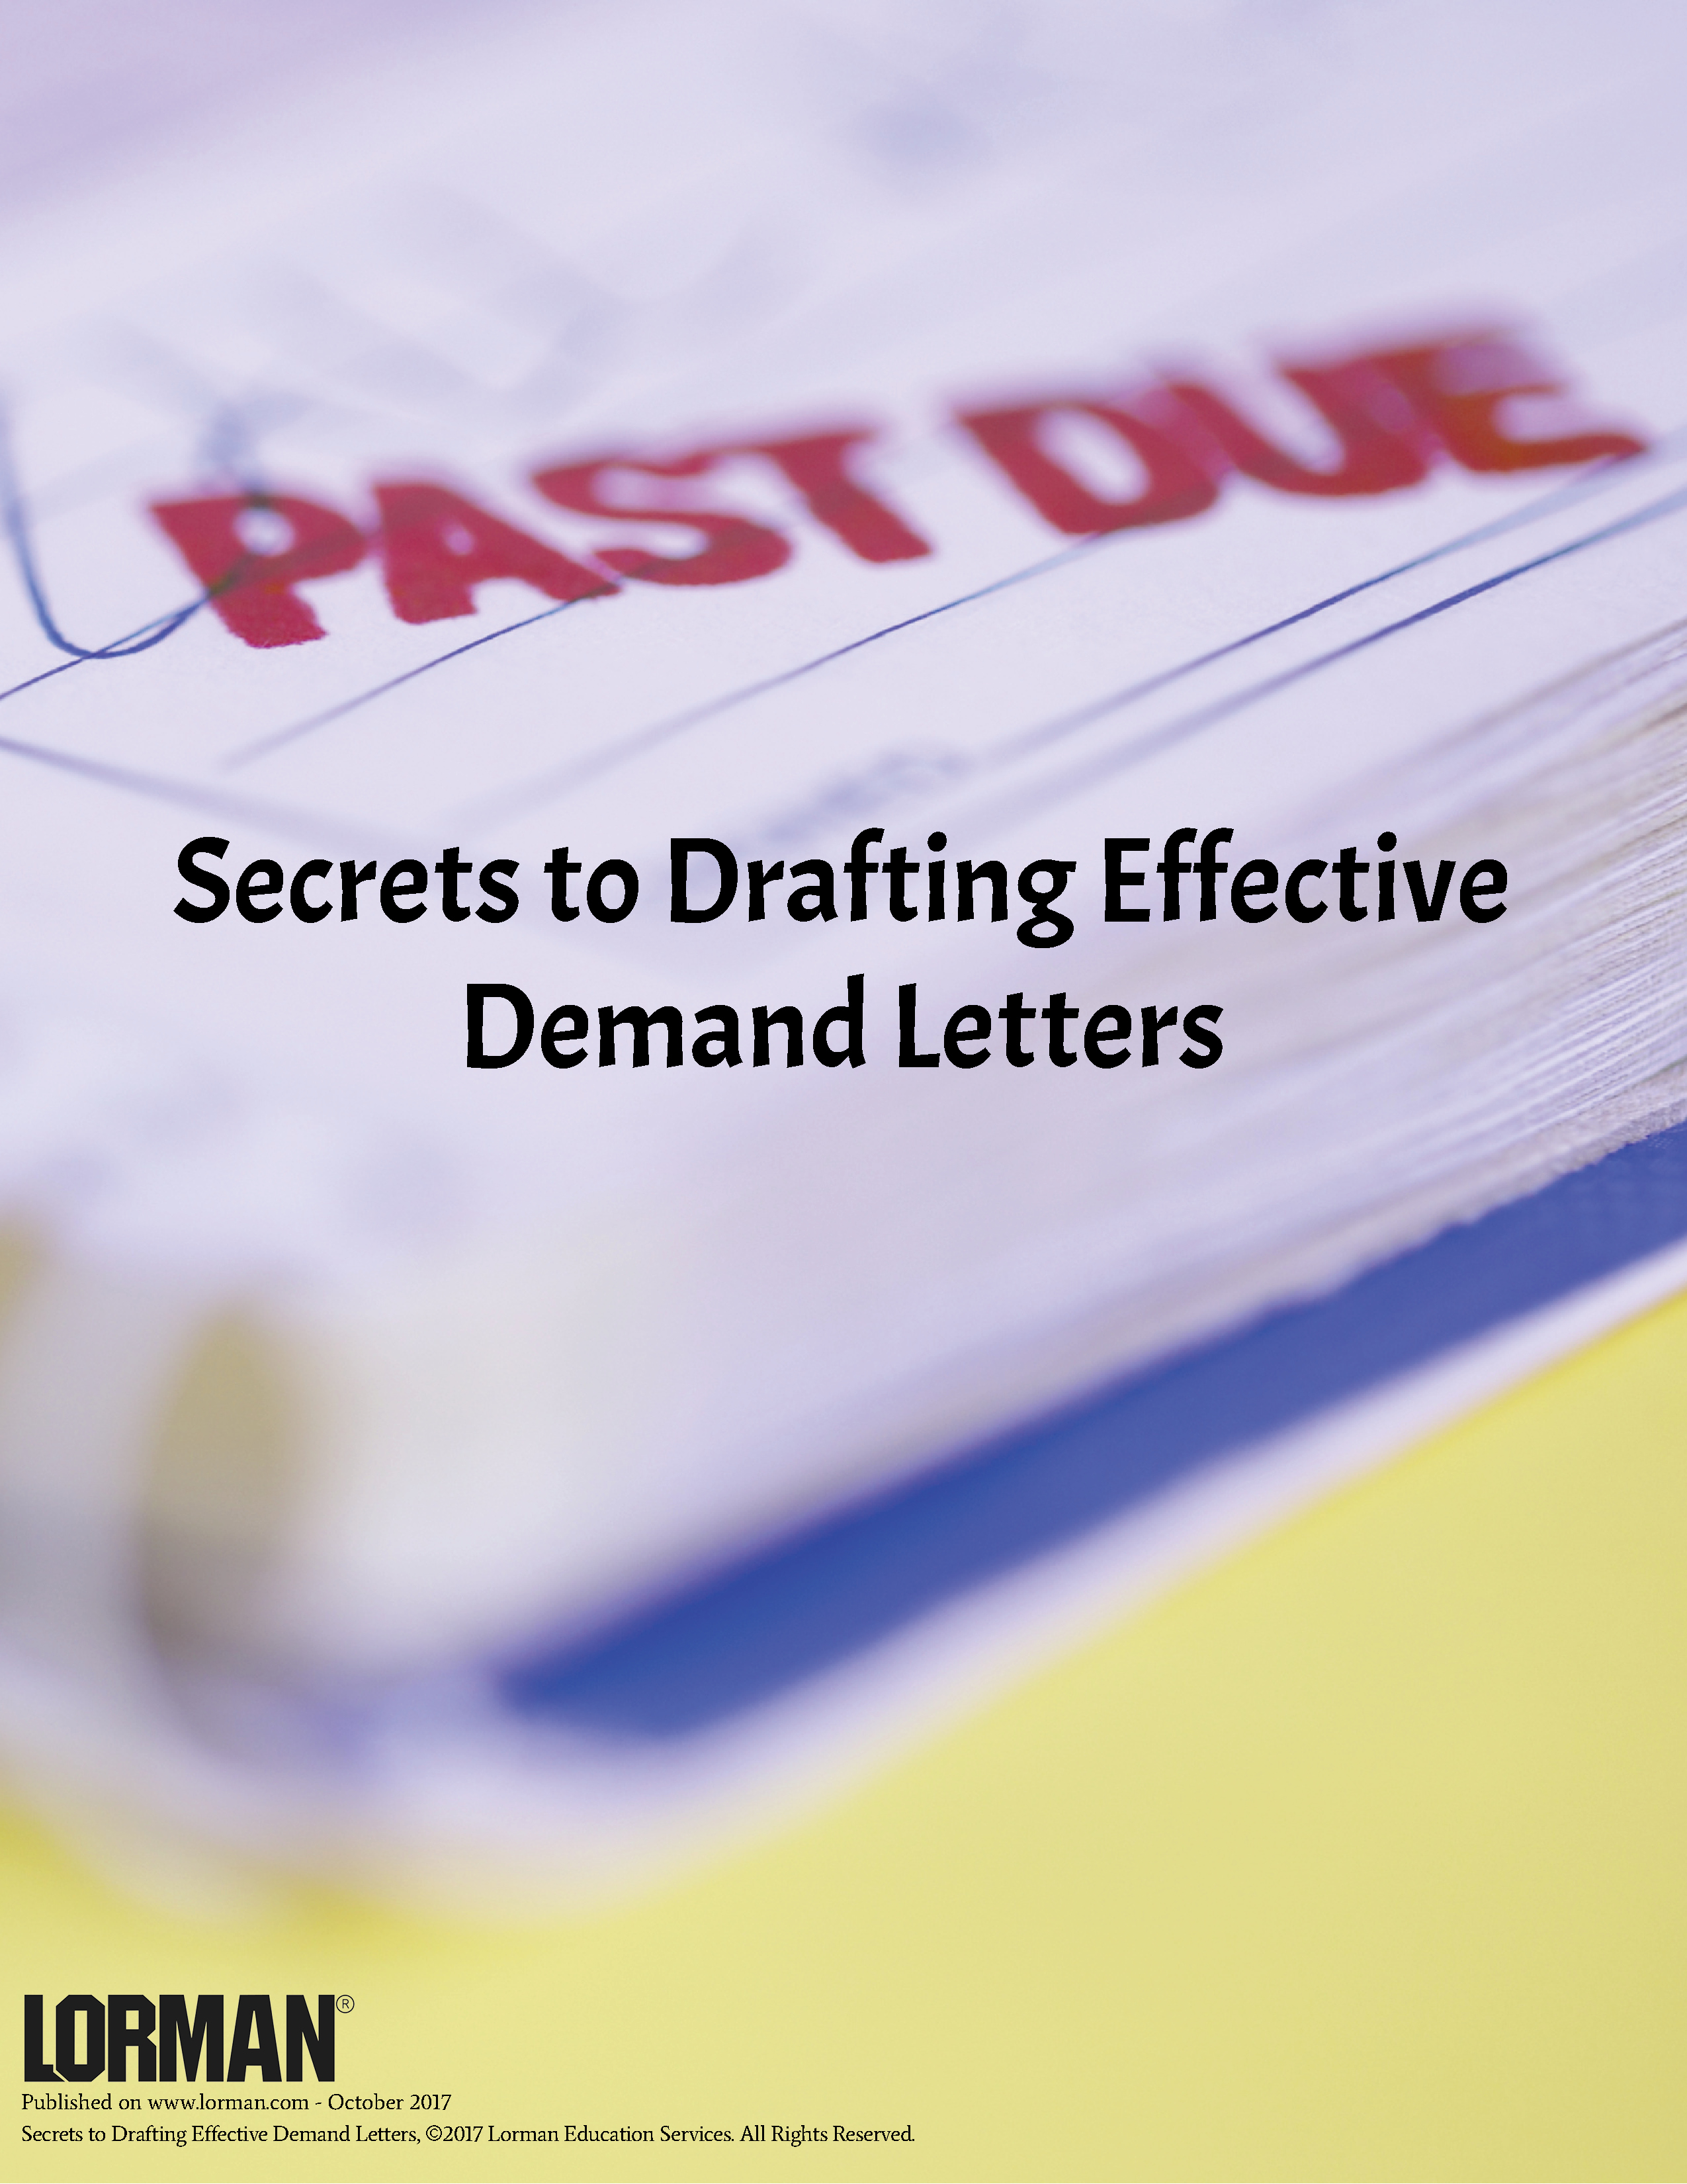 Secrets to Drafting Effective Demand Letters